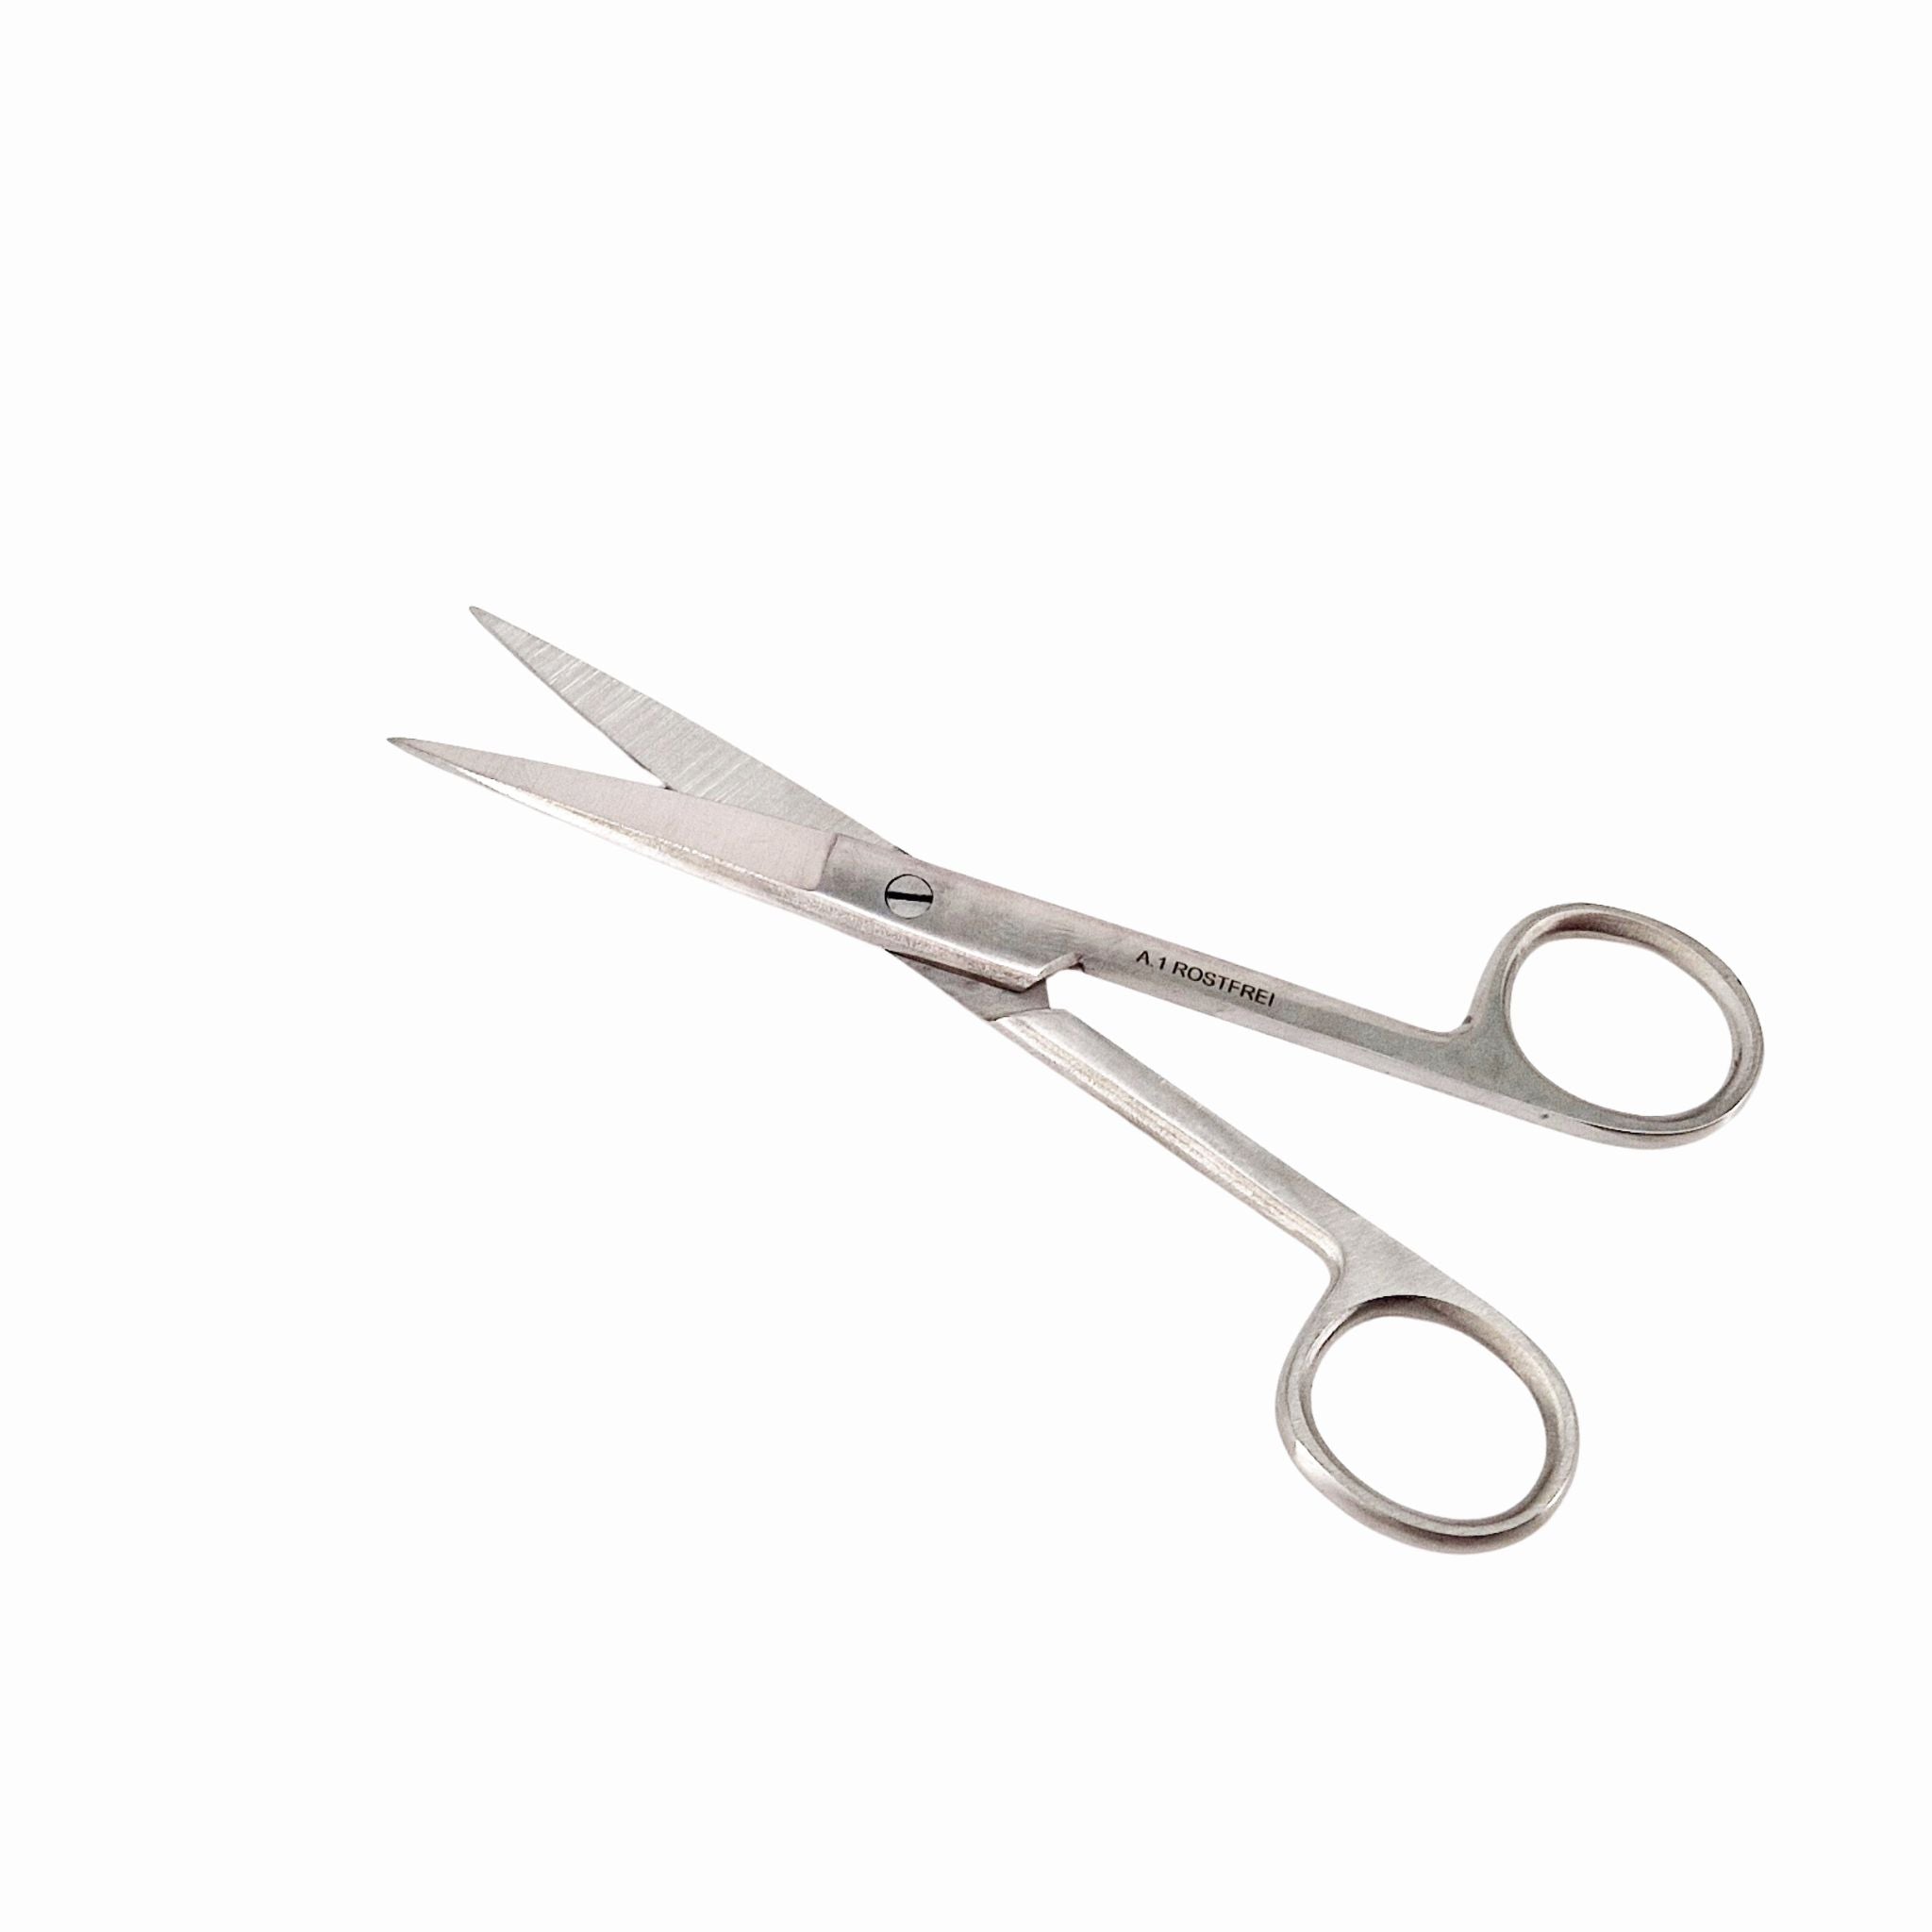 Lavabis surgical scissors straight stainless steel